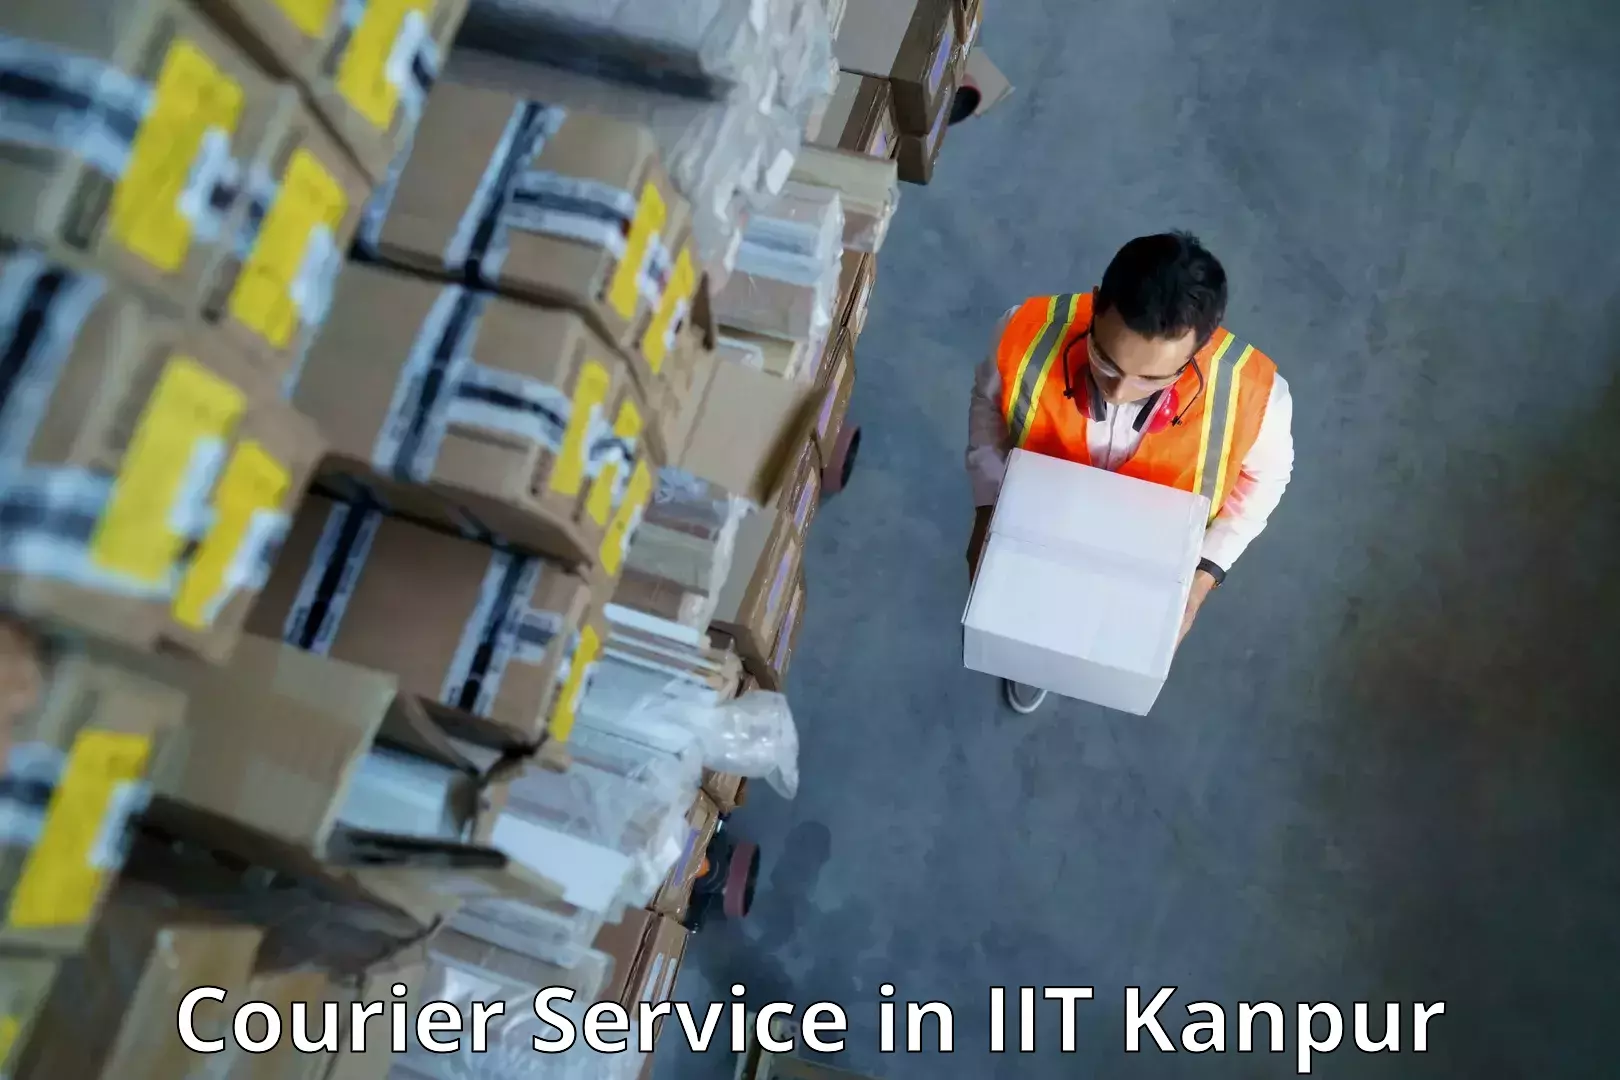 Multi-national courier services in IIT Kanpur